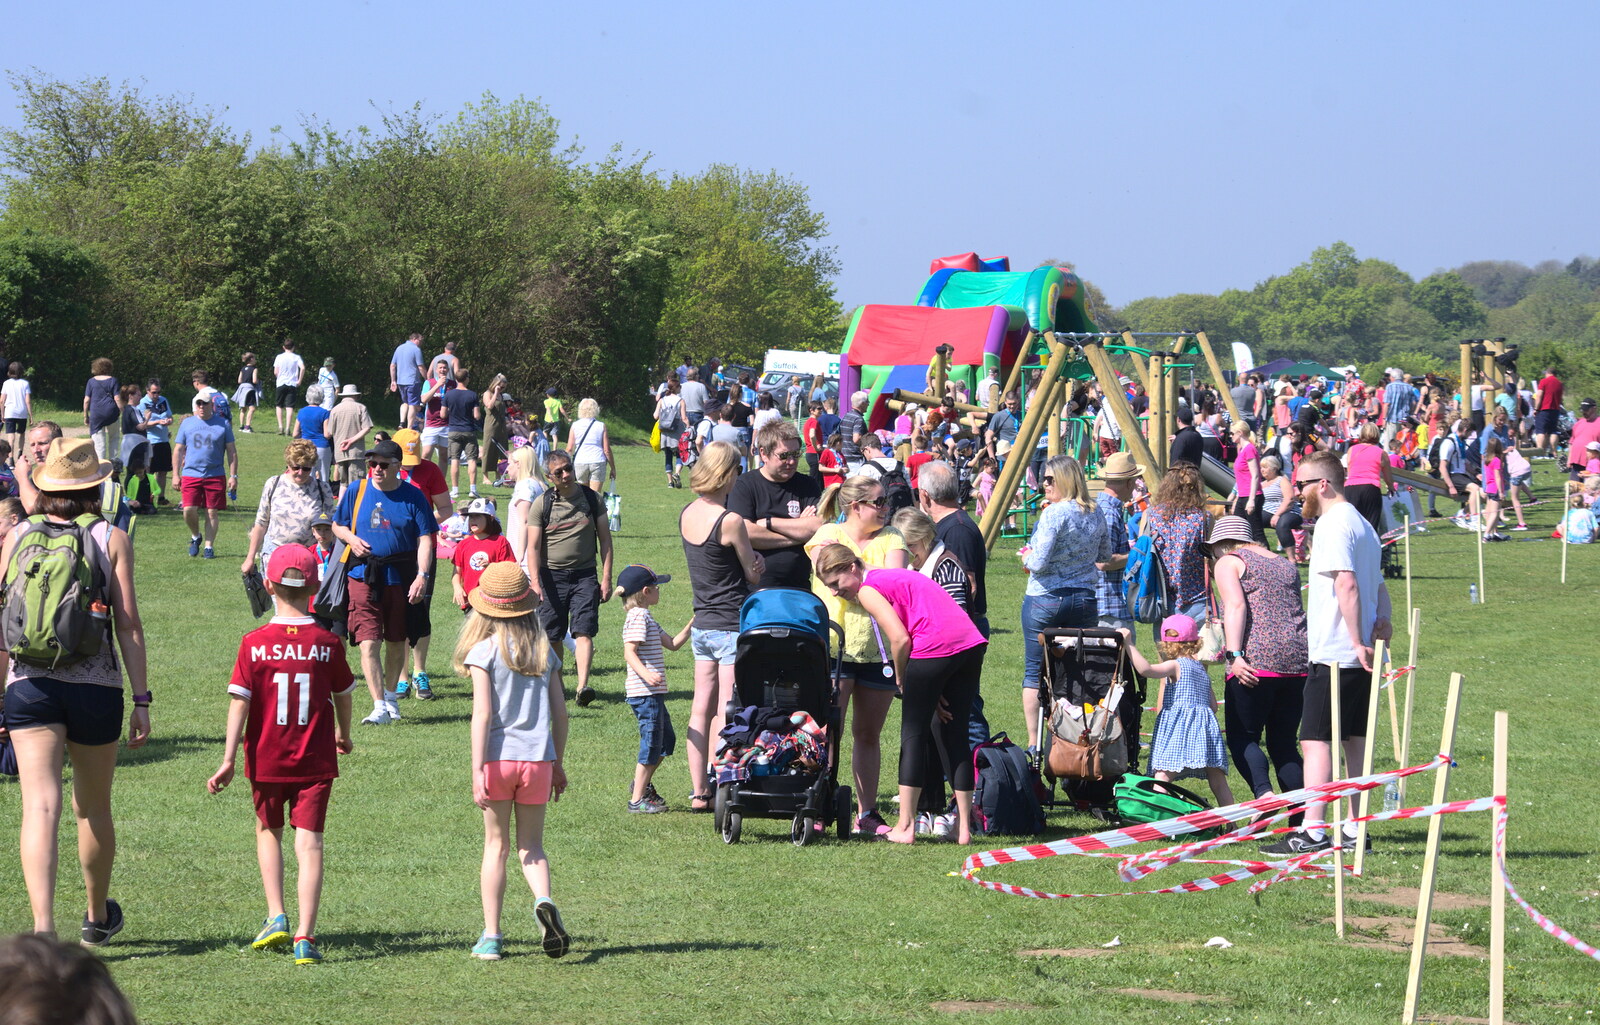 Crowds mill around at the finish line from Isobel's 10km Run, Alton Water, Stutton, Suffolk - 6th May 2018